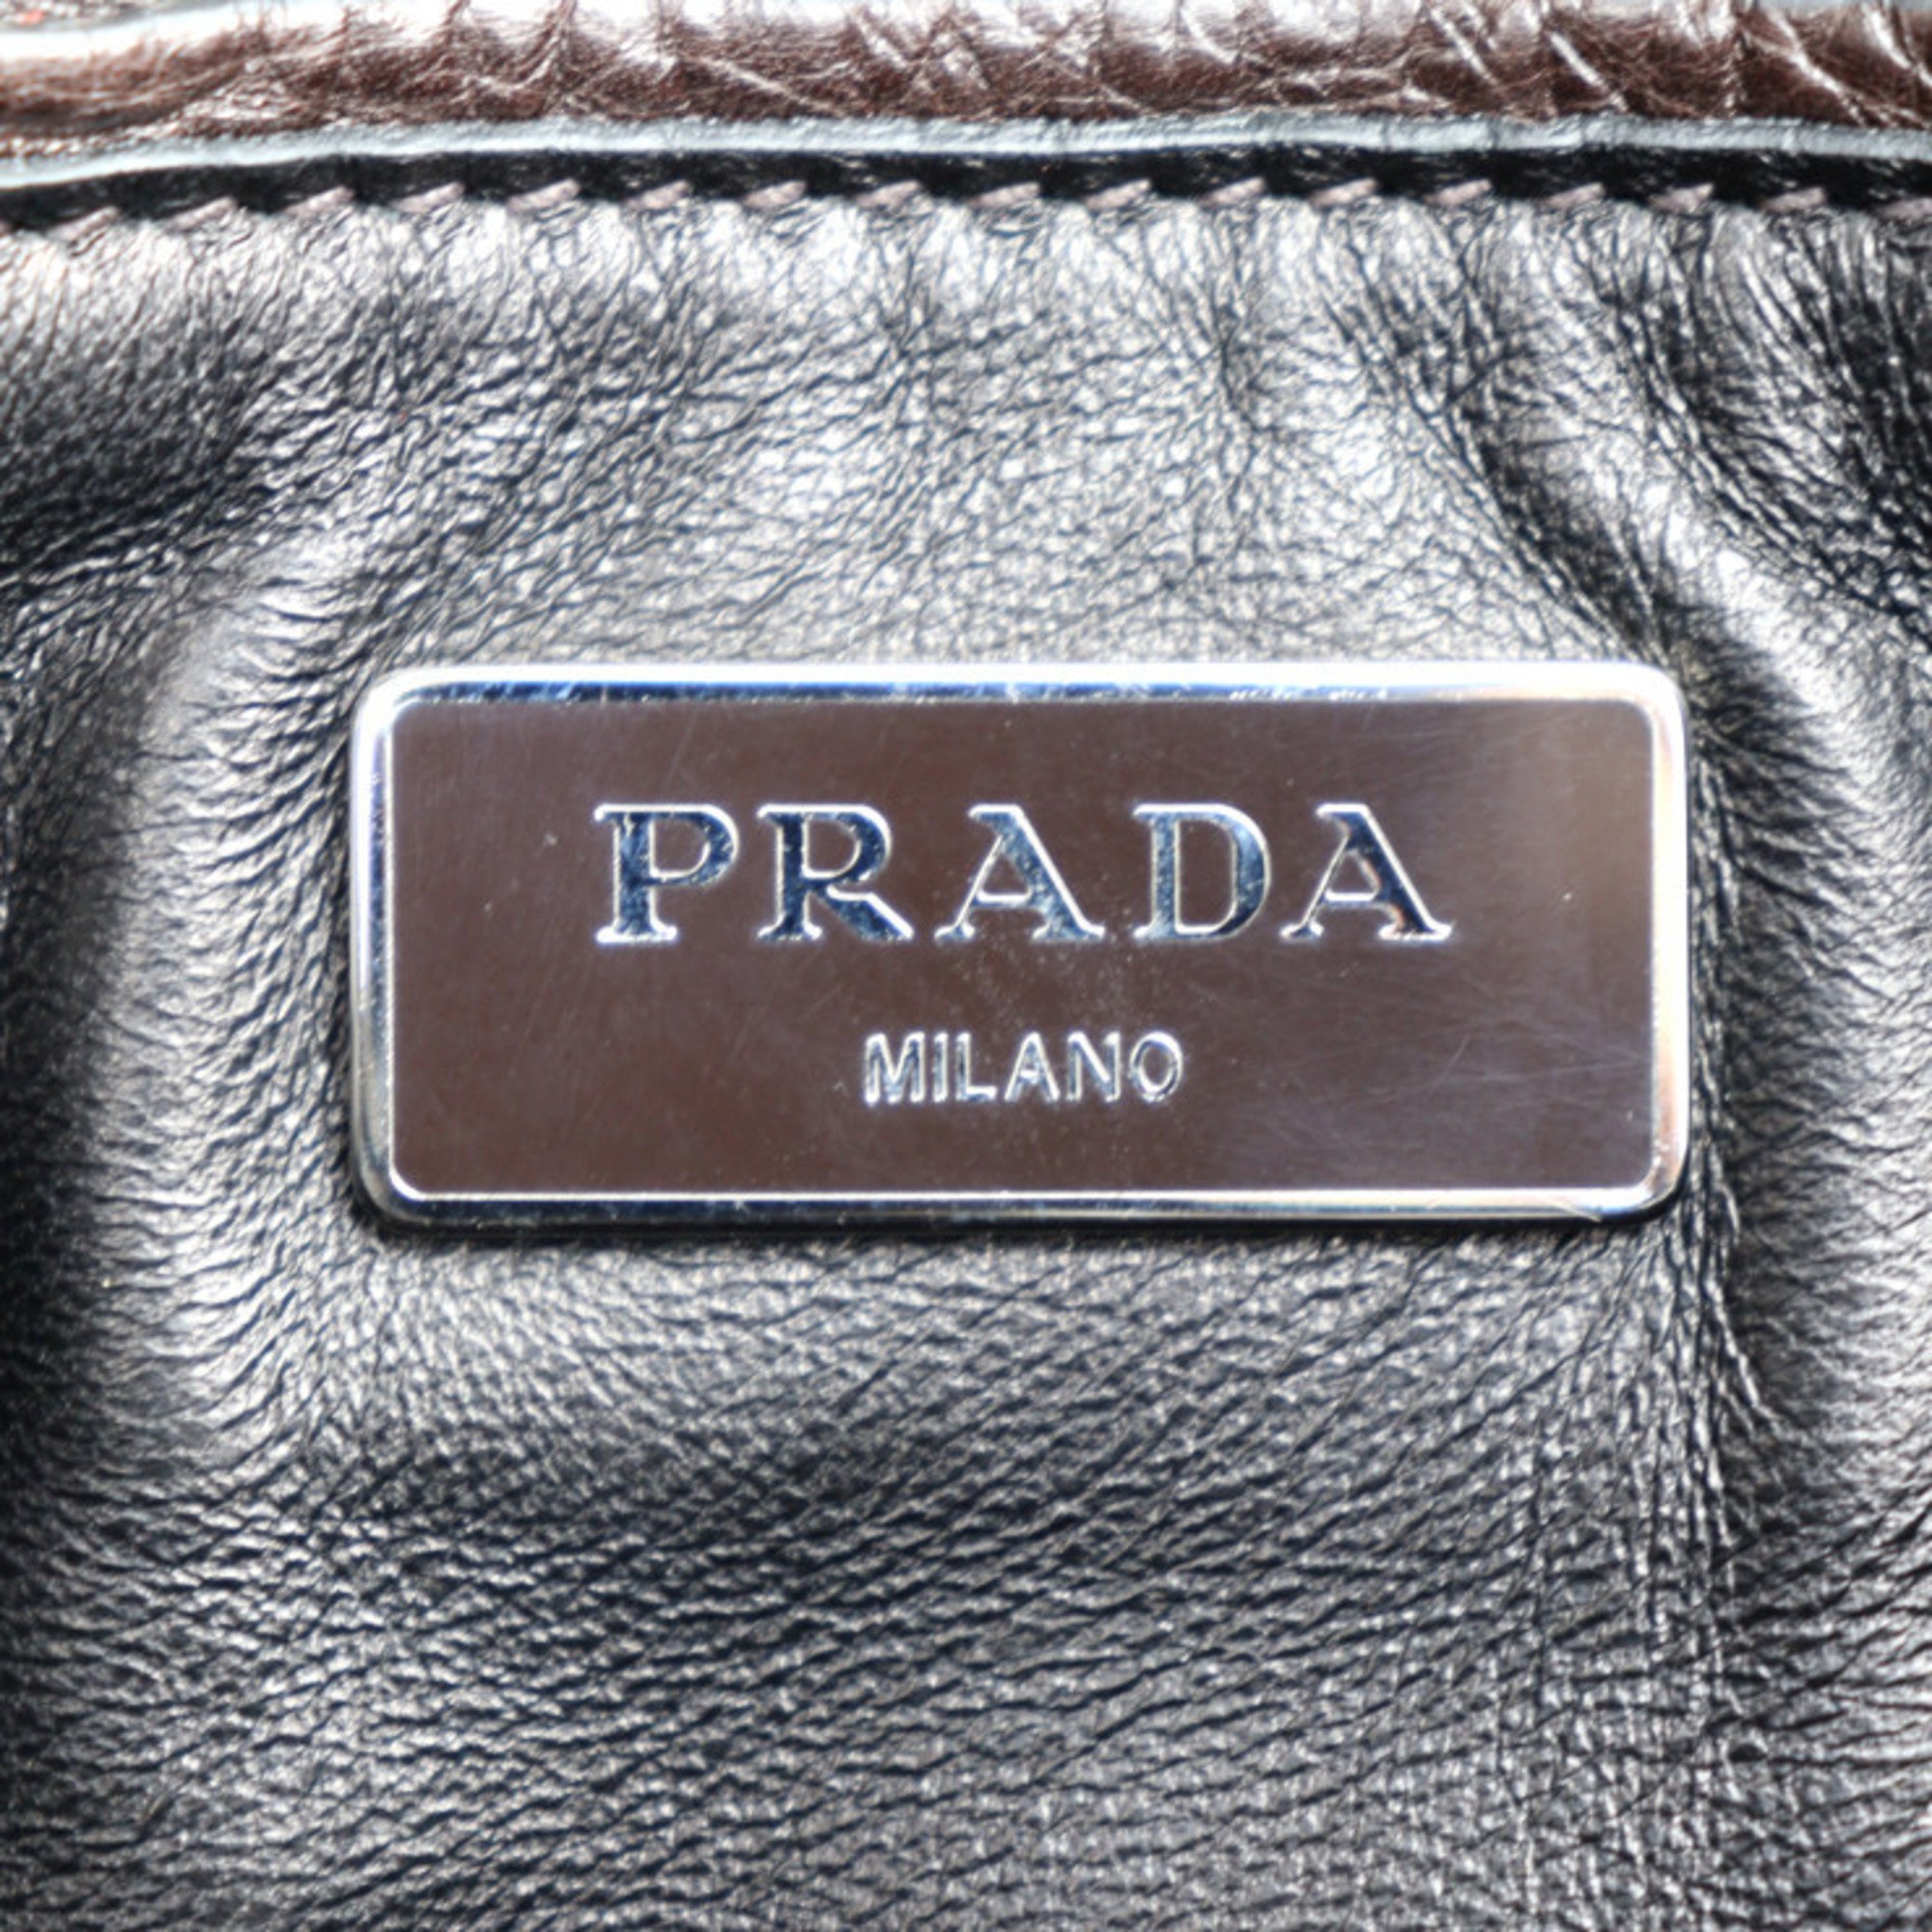 PRADA Handbag BN2625 Gray Scarf MORO Dark Brown Silver Metal Fittings 2WAY Shoulder Bag All Leather (The inside is also made of leather for a luxurious feel)